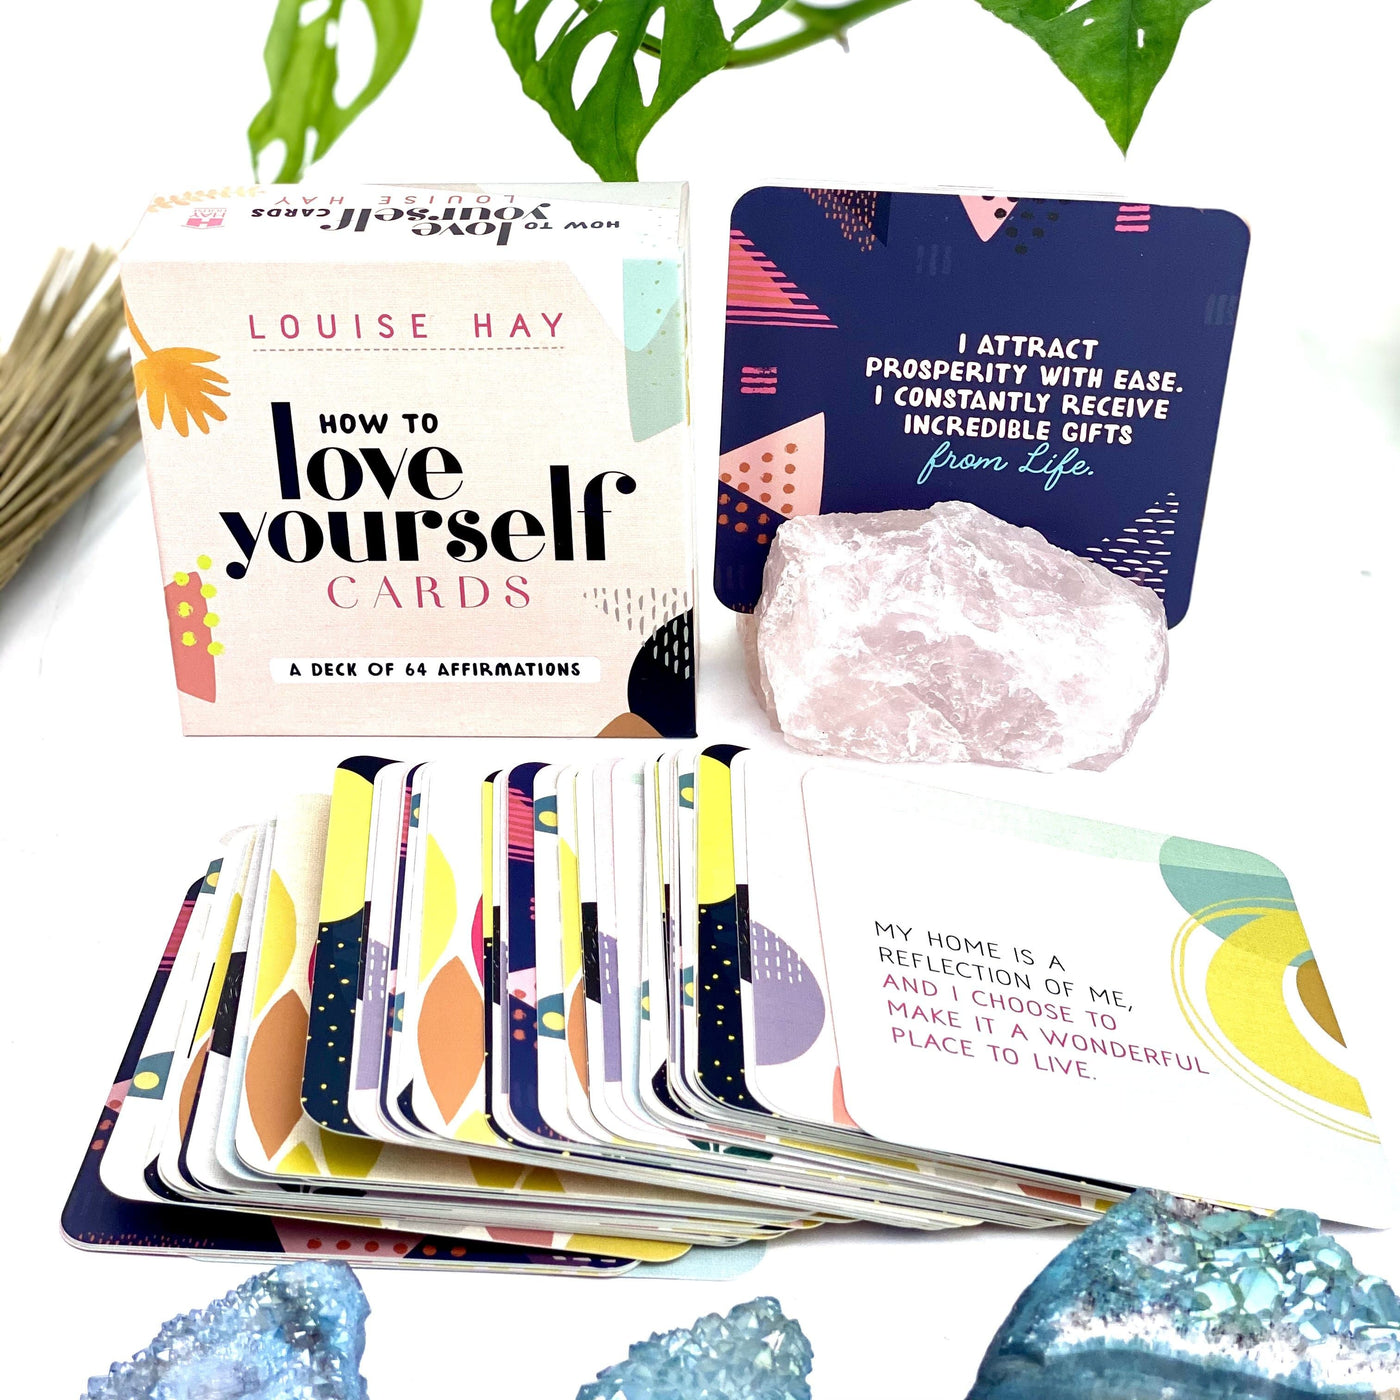 Photo showing the outer box of How to love yourself cards, and some of the cards spread out.